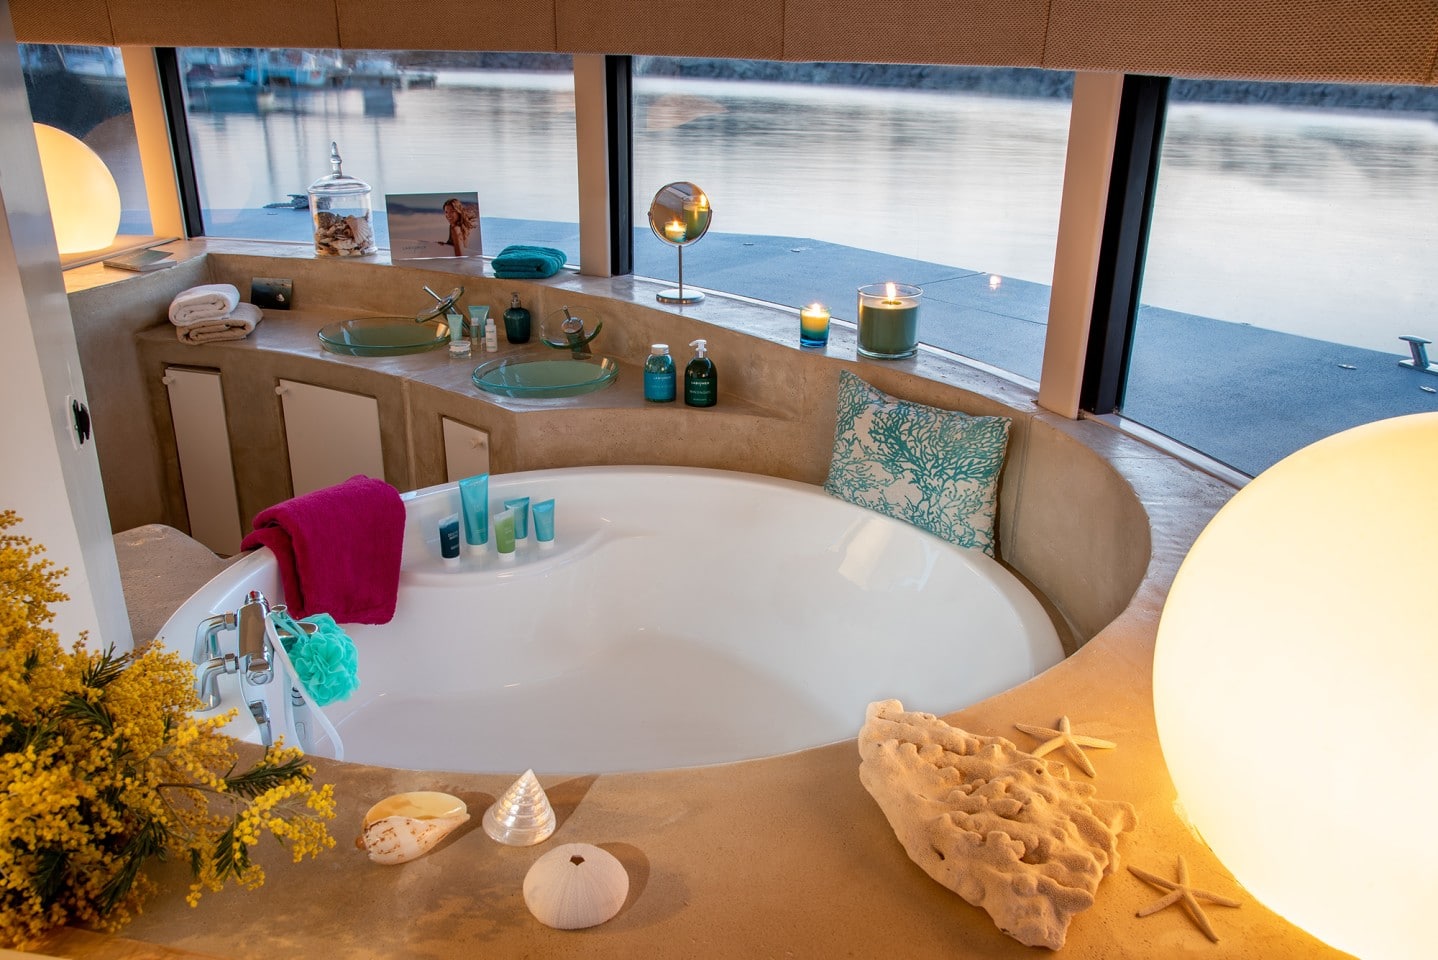 Anthenea: The Floating Hotel Suites Inspired By &#8216;The Spy Who Loved Me&#8217;